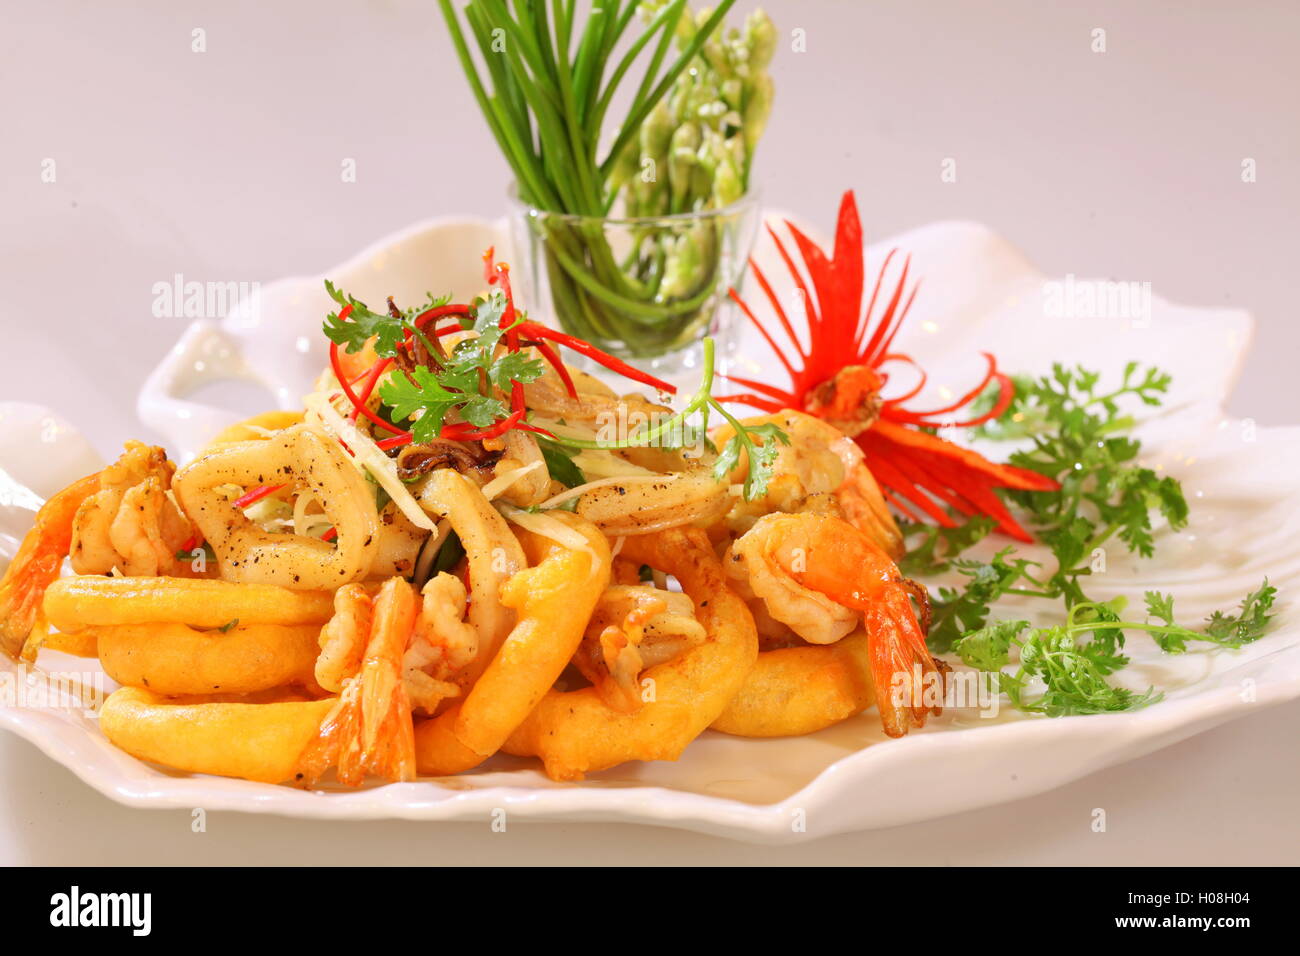 Fried shrimp and squid Stock Photo